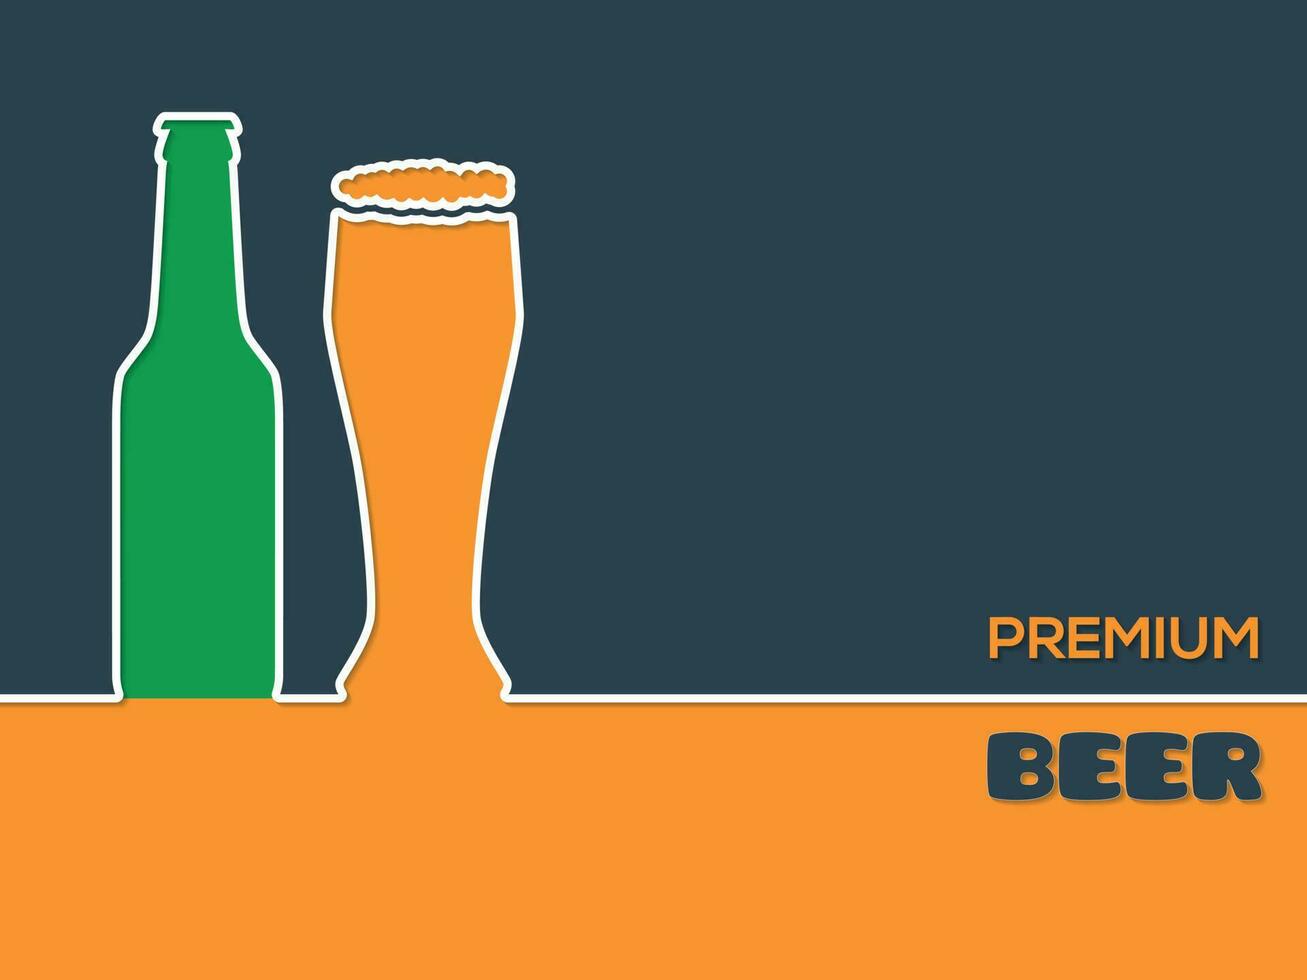 Premium Beer Vector Background, Isolated Background.